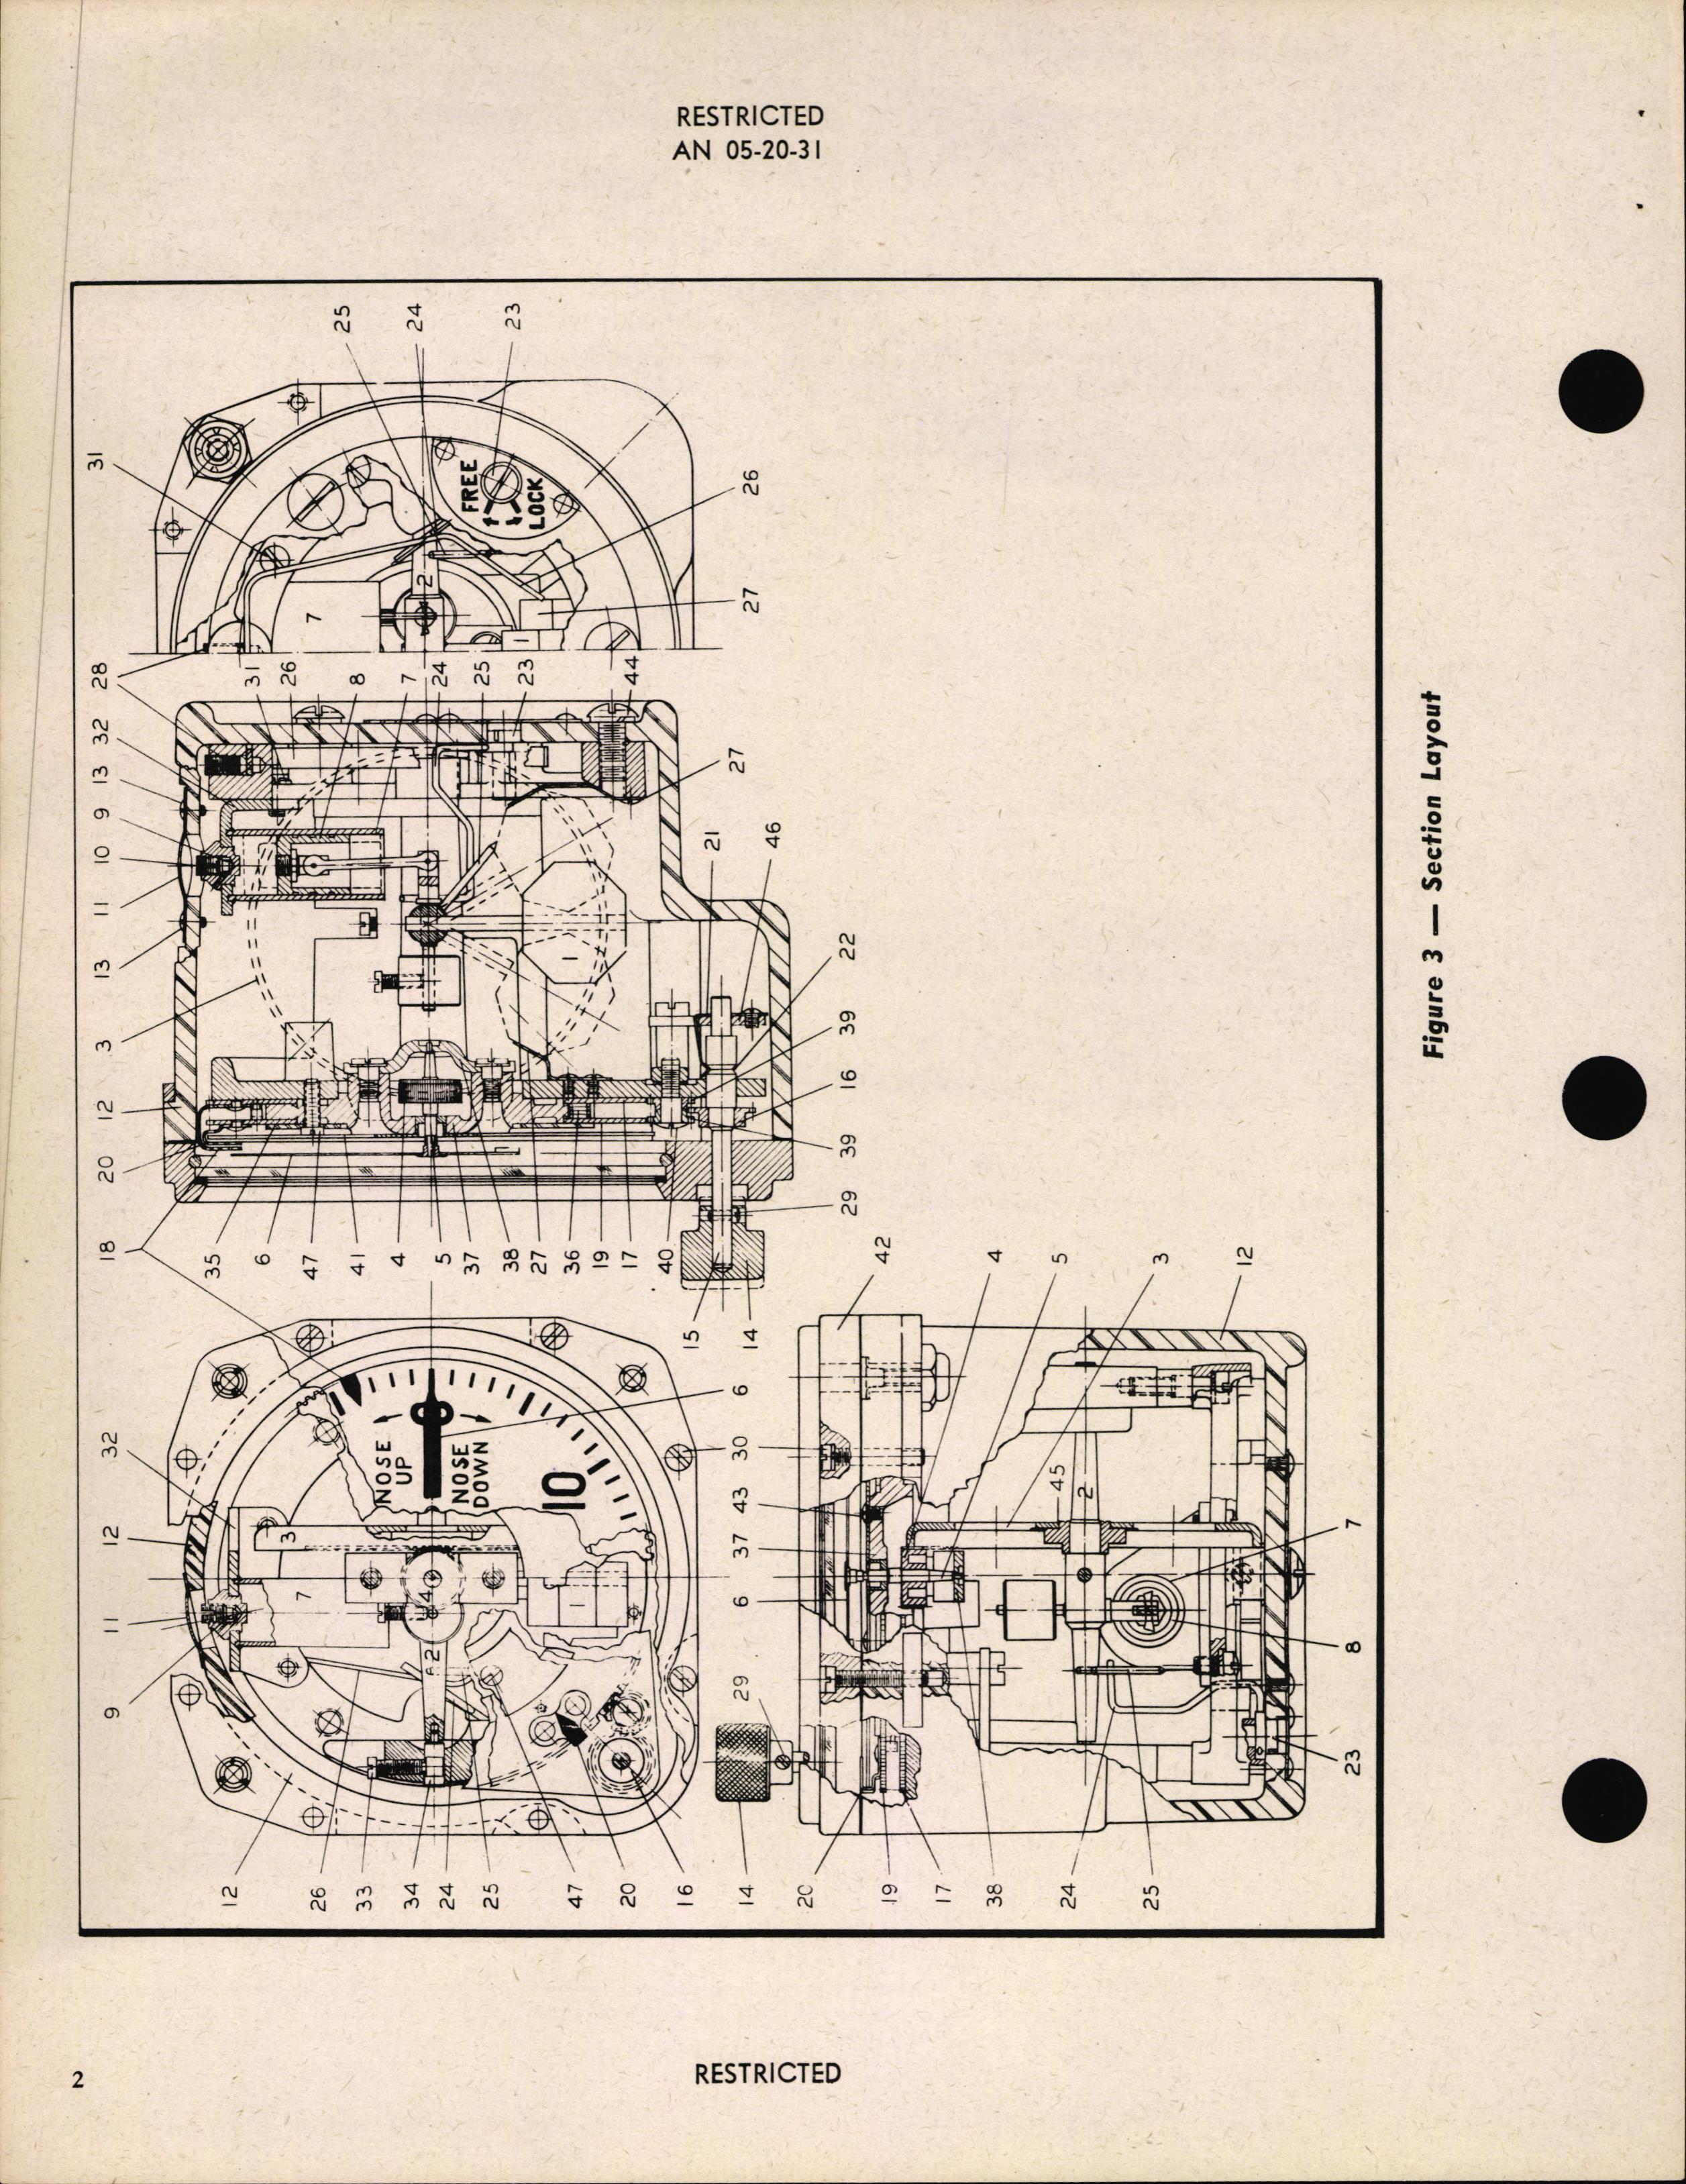 Sample page 8 from AirCorps Library document: Handbook of Instructions with Parts Catalog for Type B-2 Inclinometer